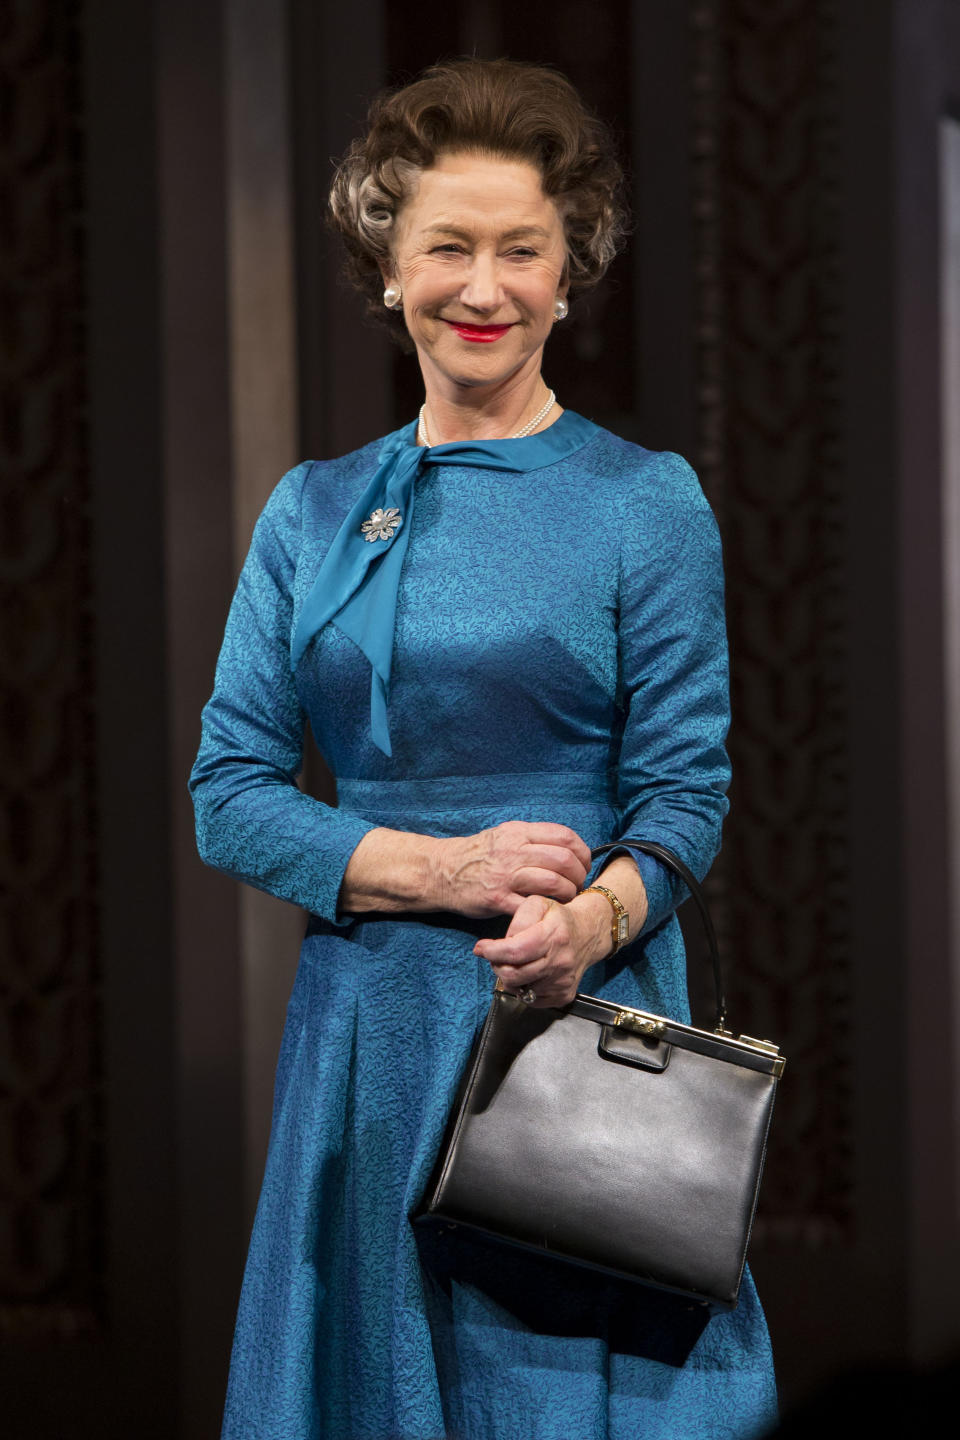 FILE - Helen Mirren appears on stage as Queen Elizabeth II at the Broadway opening night curtain call of "The Audience" on March 8, 2015, in New York. (Greg Allen/Invision/AP, File)